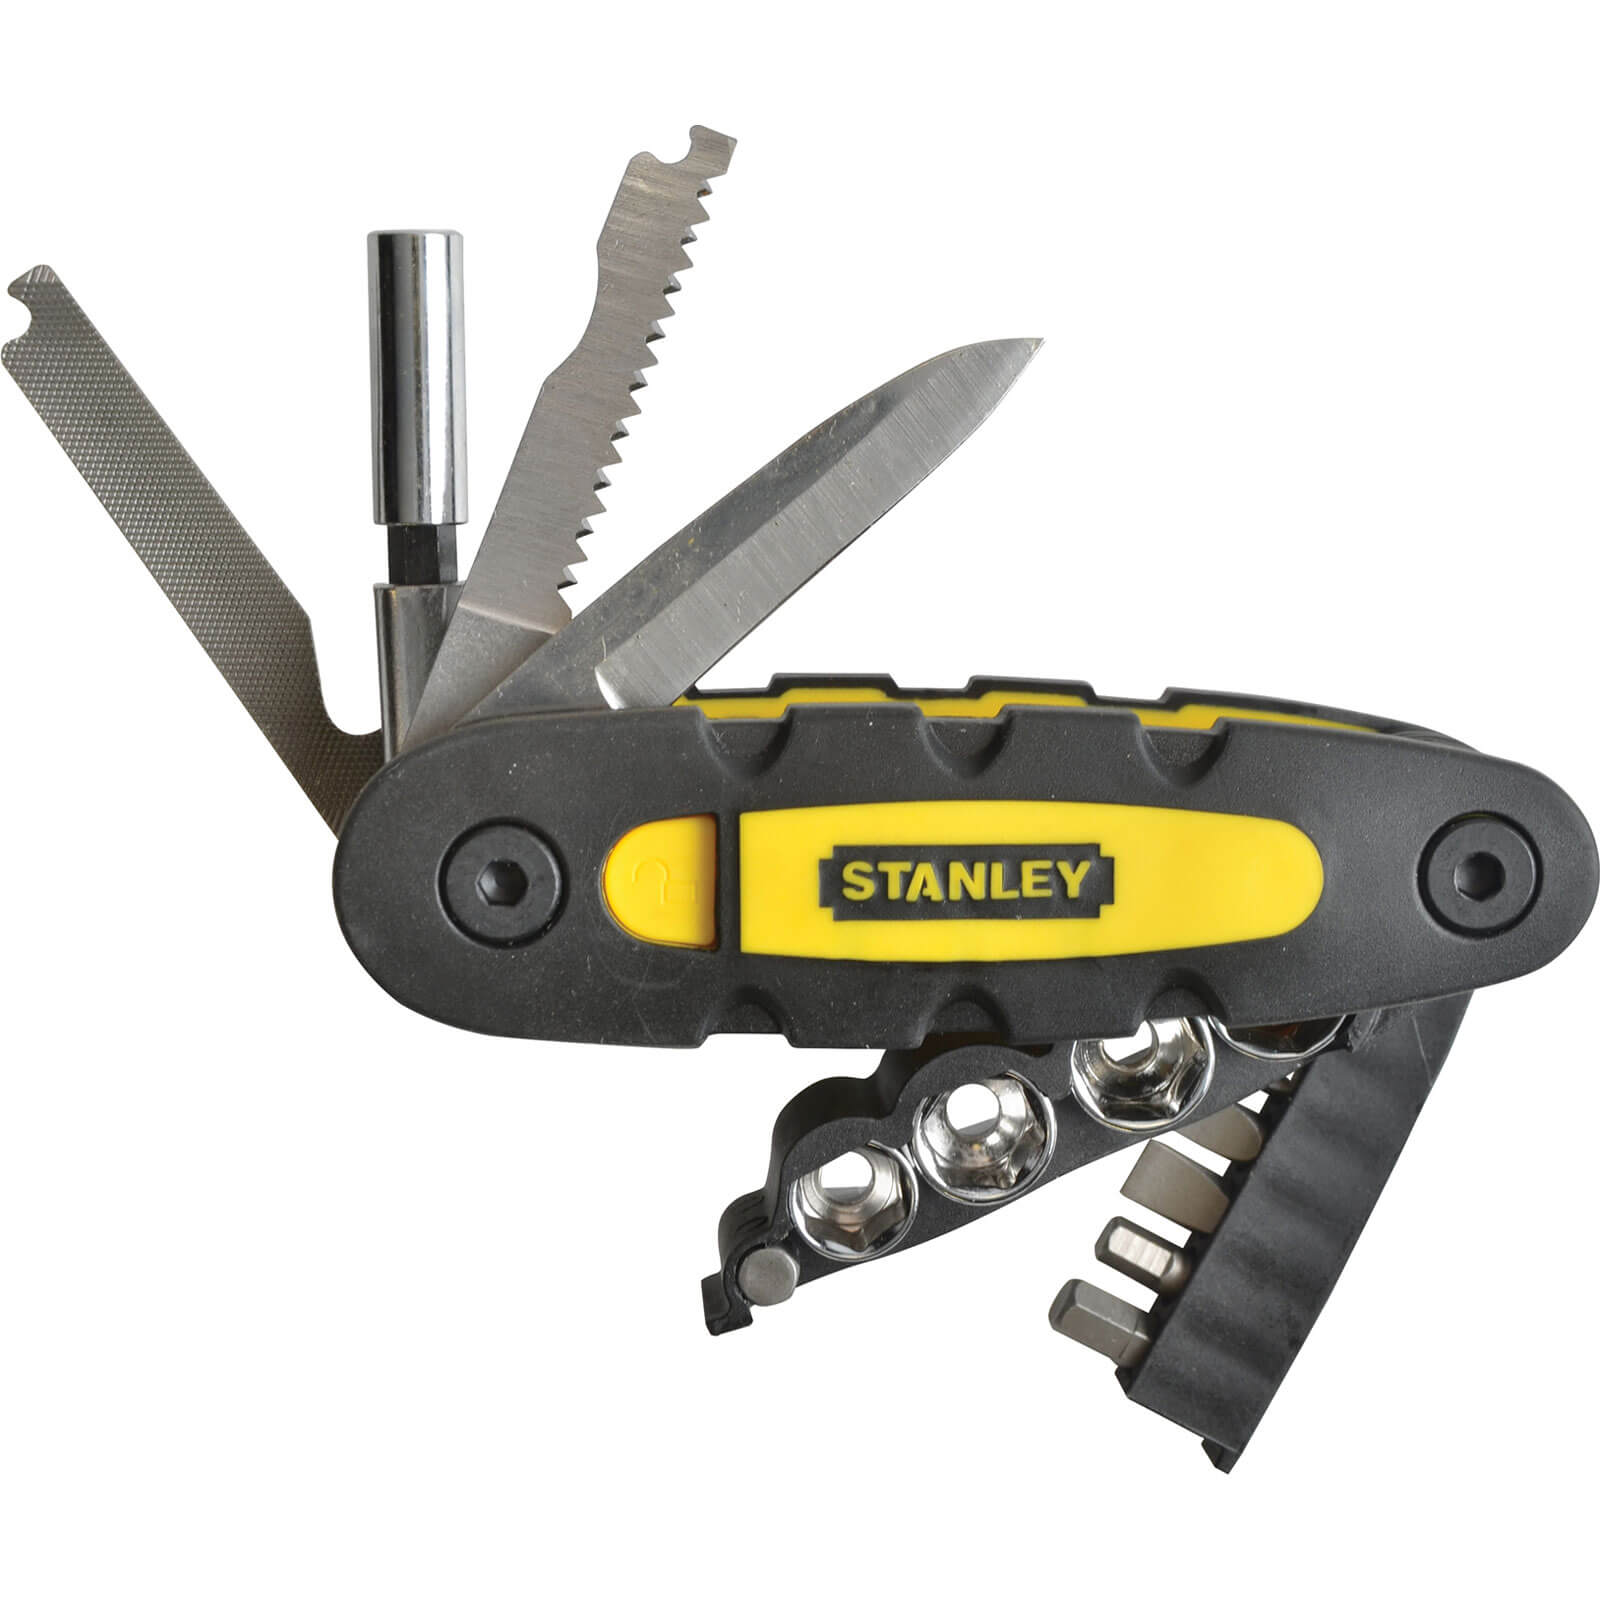 Stanley 14 Piece Multi Tool with Knife, Saw, File, Sockets & Bits